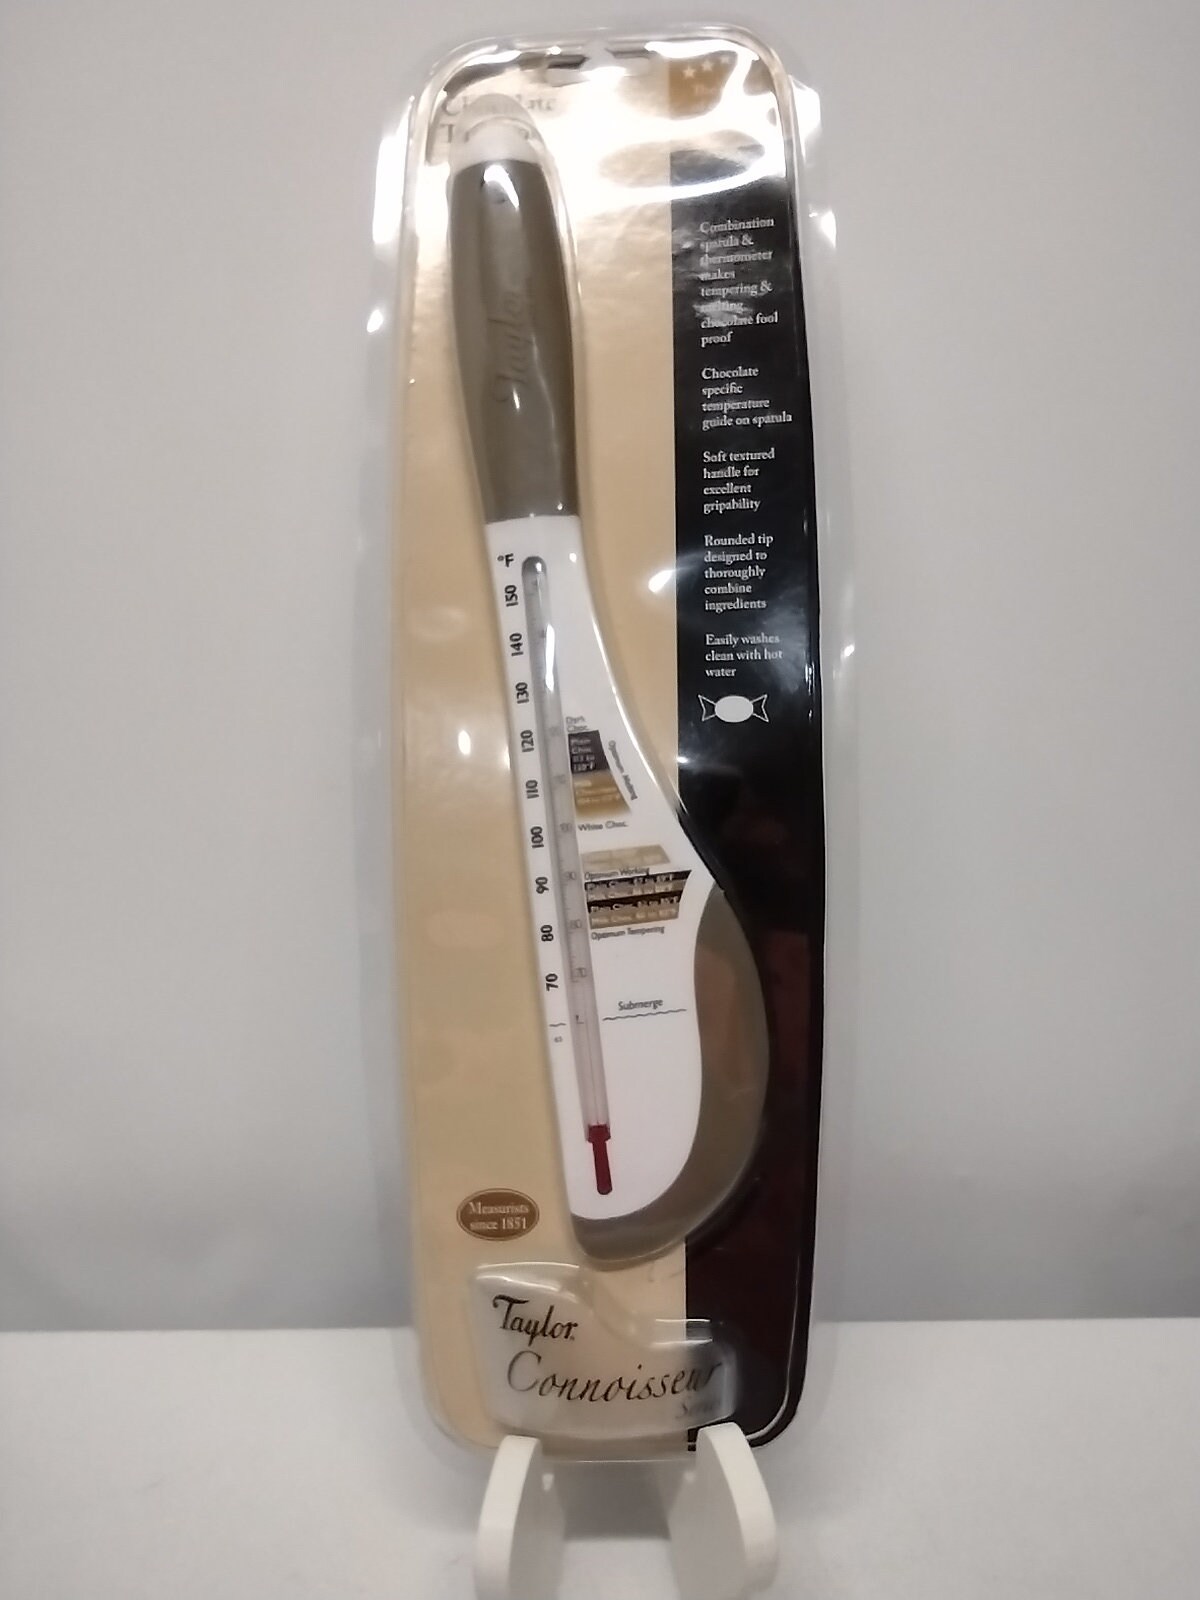 Taylor Connoisseur Chocolate Spatula Thermometer